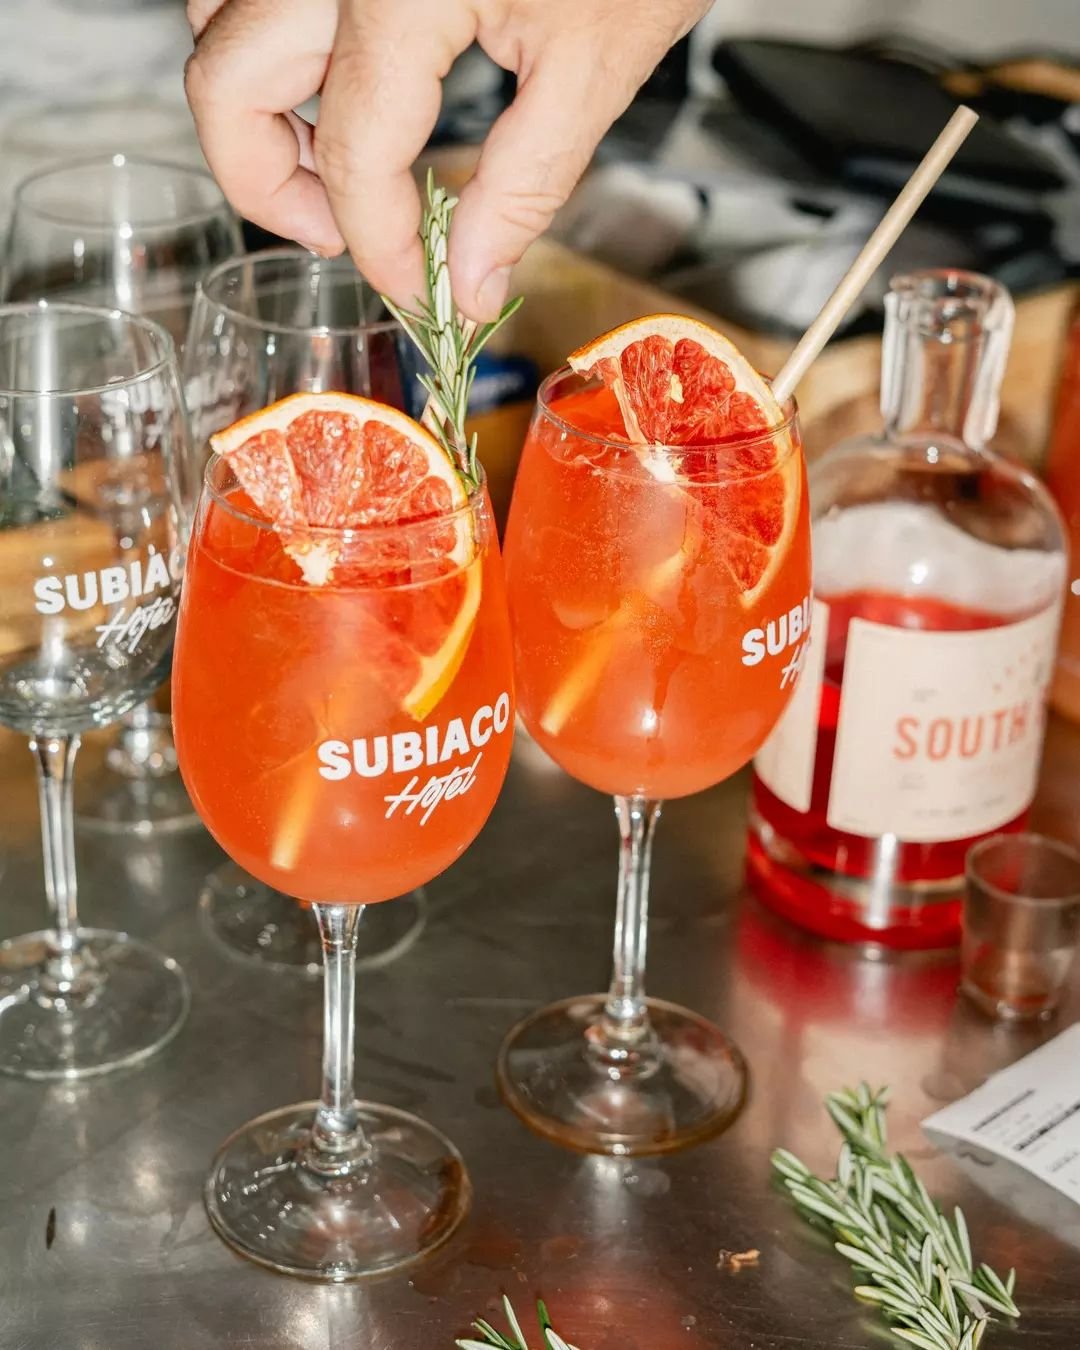 ✹ Saturdays are for sipping on Spritzes&nbsp;✹

Sit back and enjoy 2 hours of cocktails and all your brunch favourites!

For bookings follow the link in our bio.